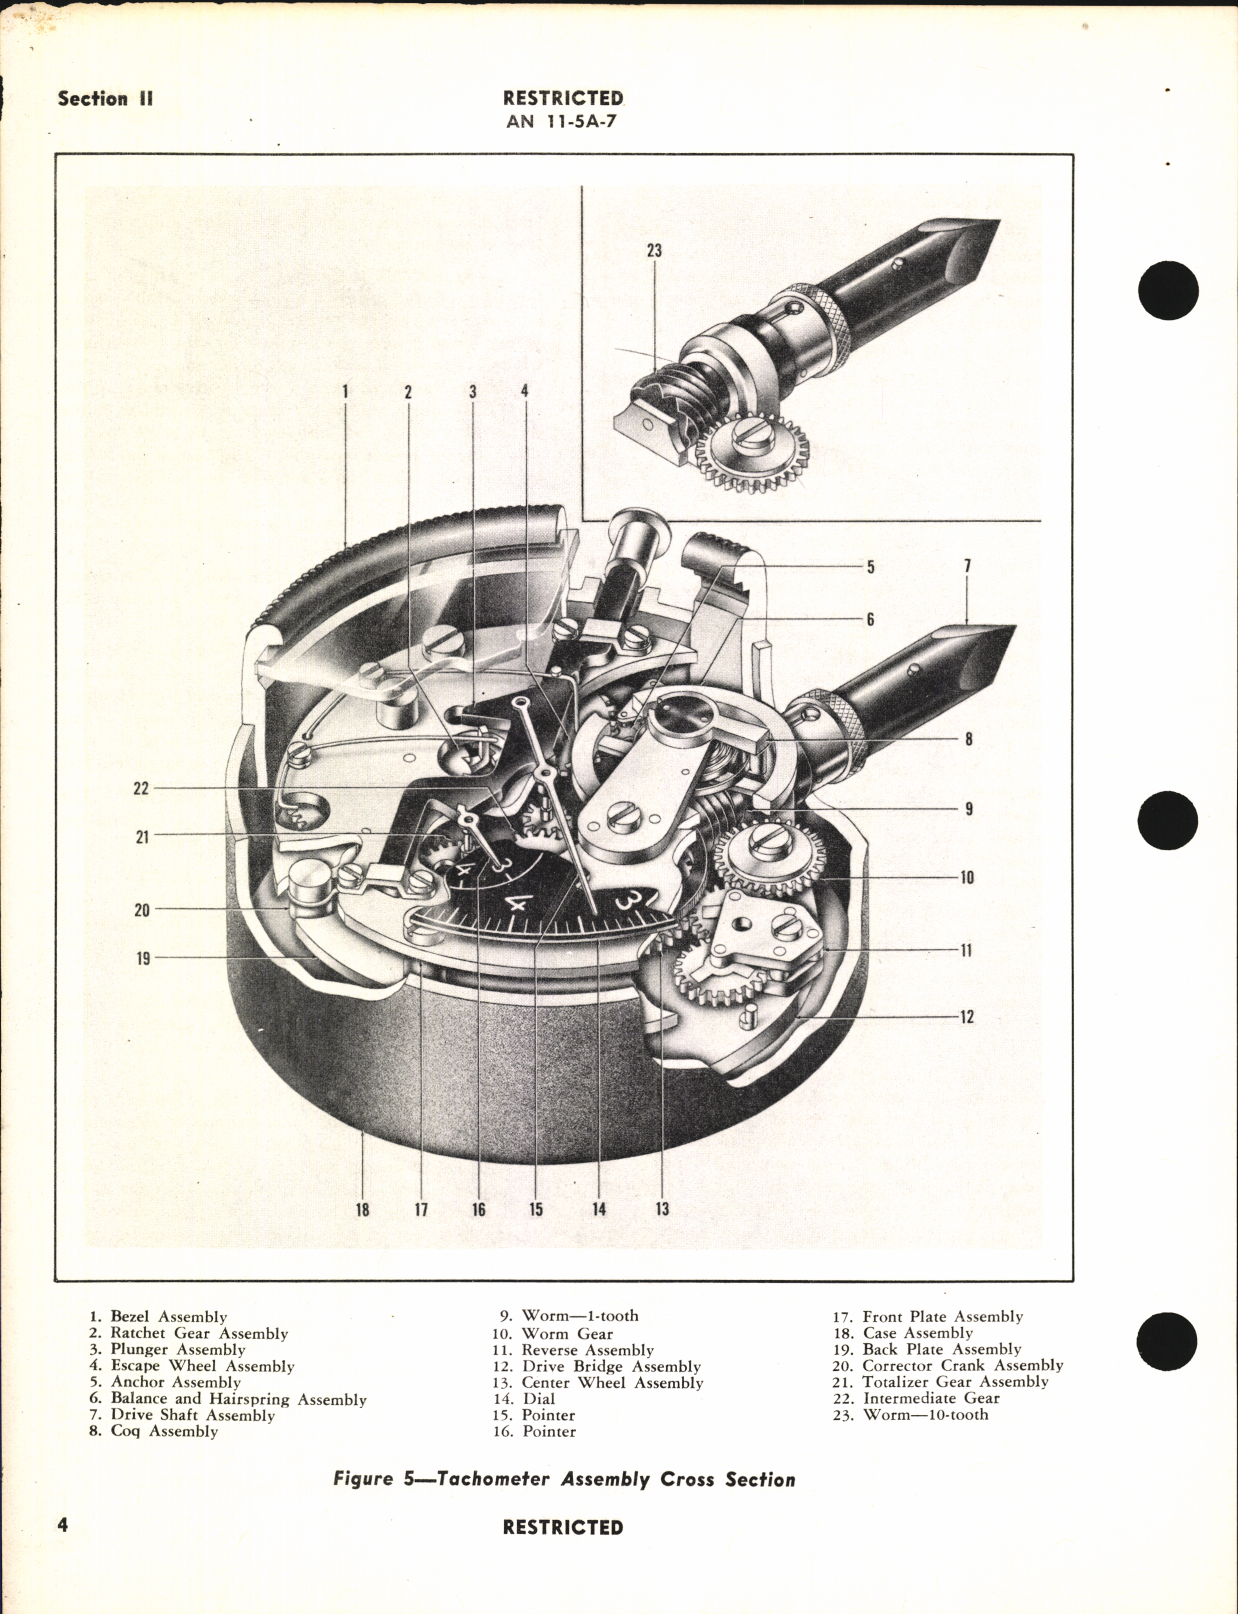 Sample page 8 from AirCorps Library document: Operation, Service, & Overhaul Instructions with Parts Catalog for Portable Bombsight Disk Speed Tachometer